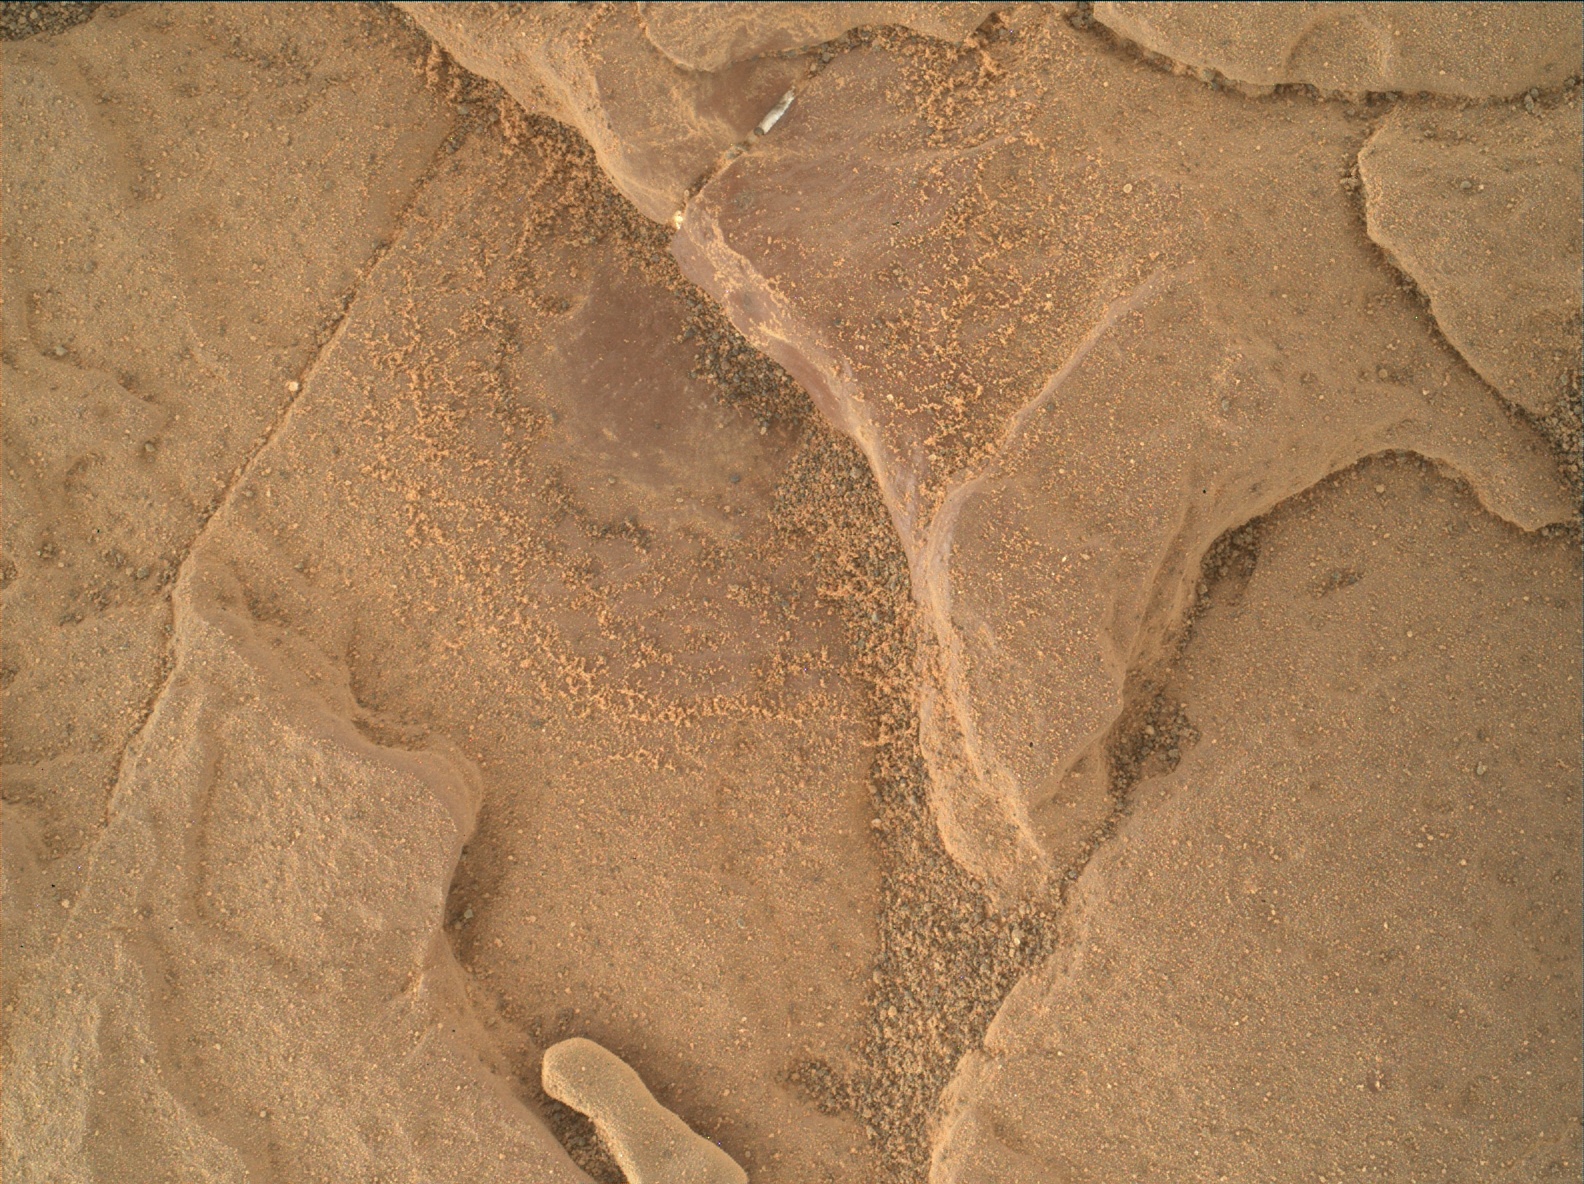 Nasa's Mars rover Curiosity acquired this image using its Mars Hand Lens Imager (MAHLI) on Sol 1871